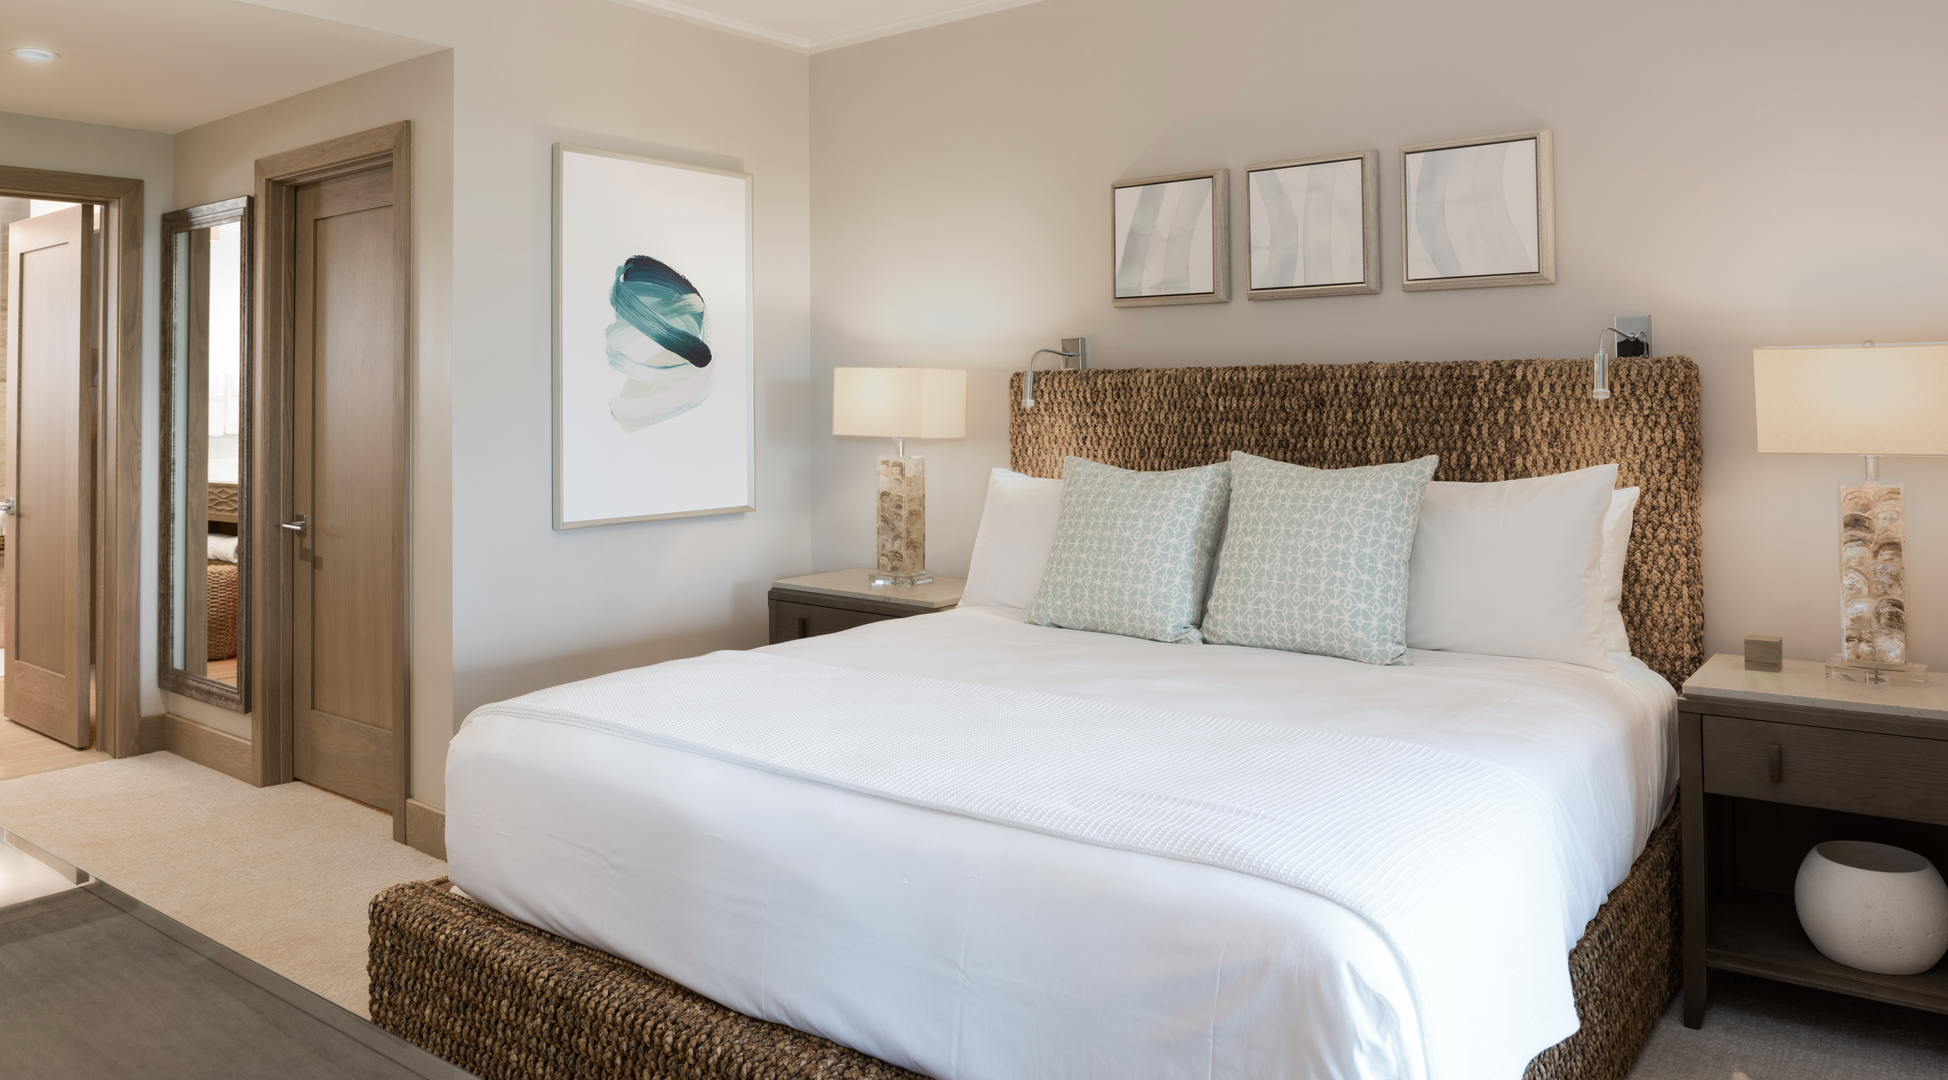 Lihue Vacation Rentals, Maliula at Hokuala 3BR Premiere* - The second bedroom also comes equipped with an inviting king-size bed.